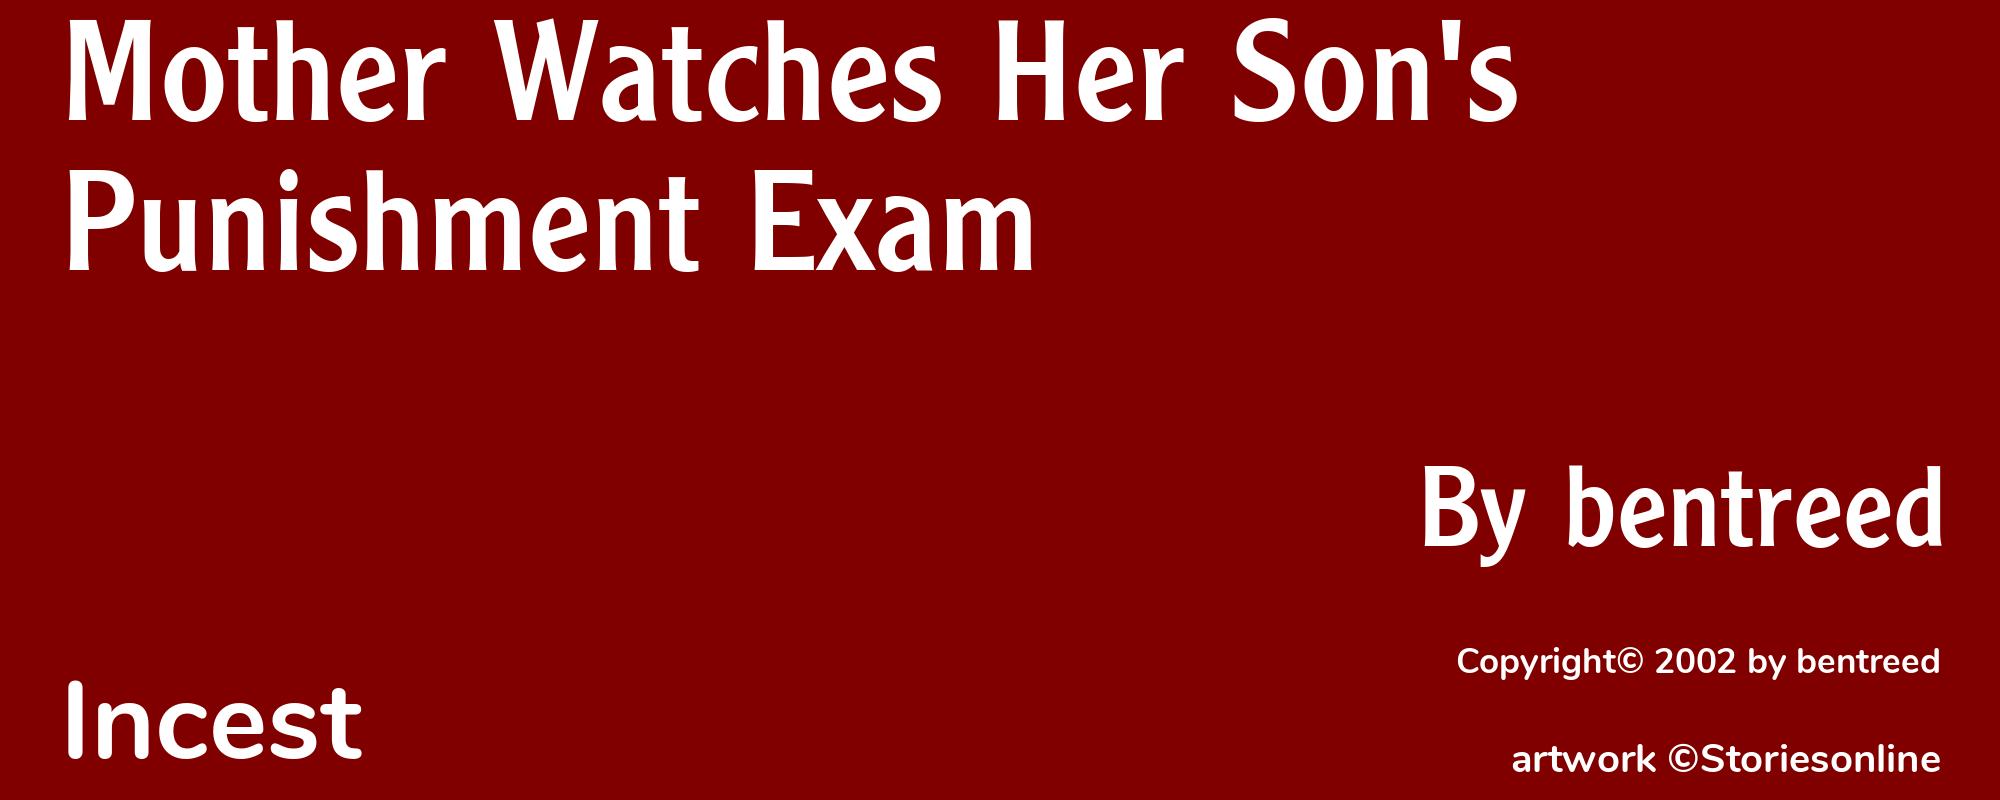 Mother Watches Her Son's Punishment Exam - Cover